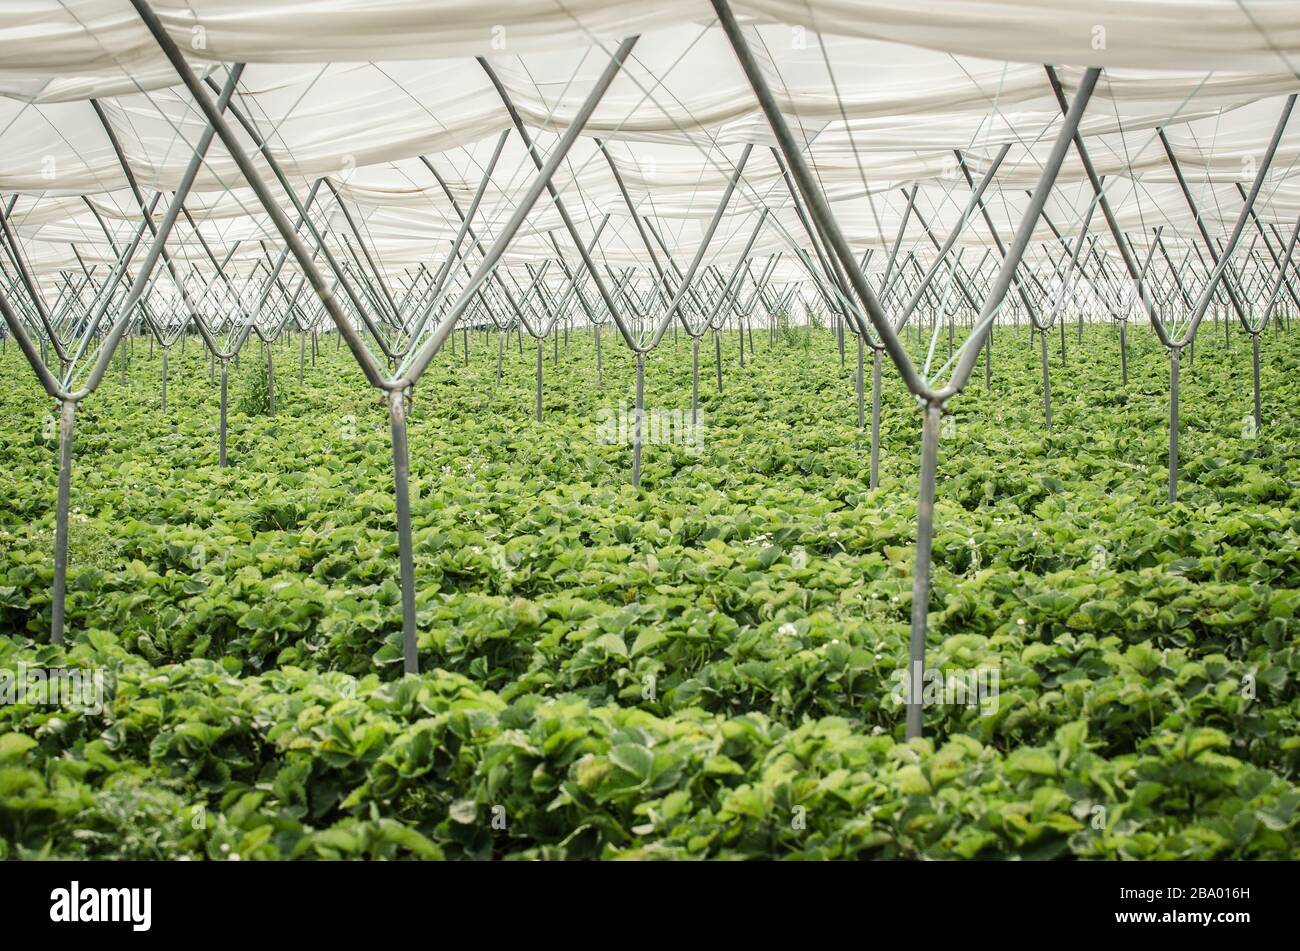 Strawberry plants in industrial greenhouse Stock Photo